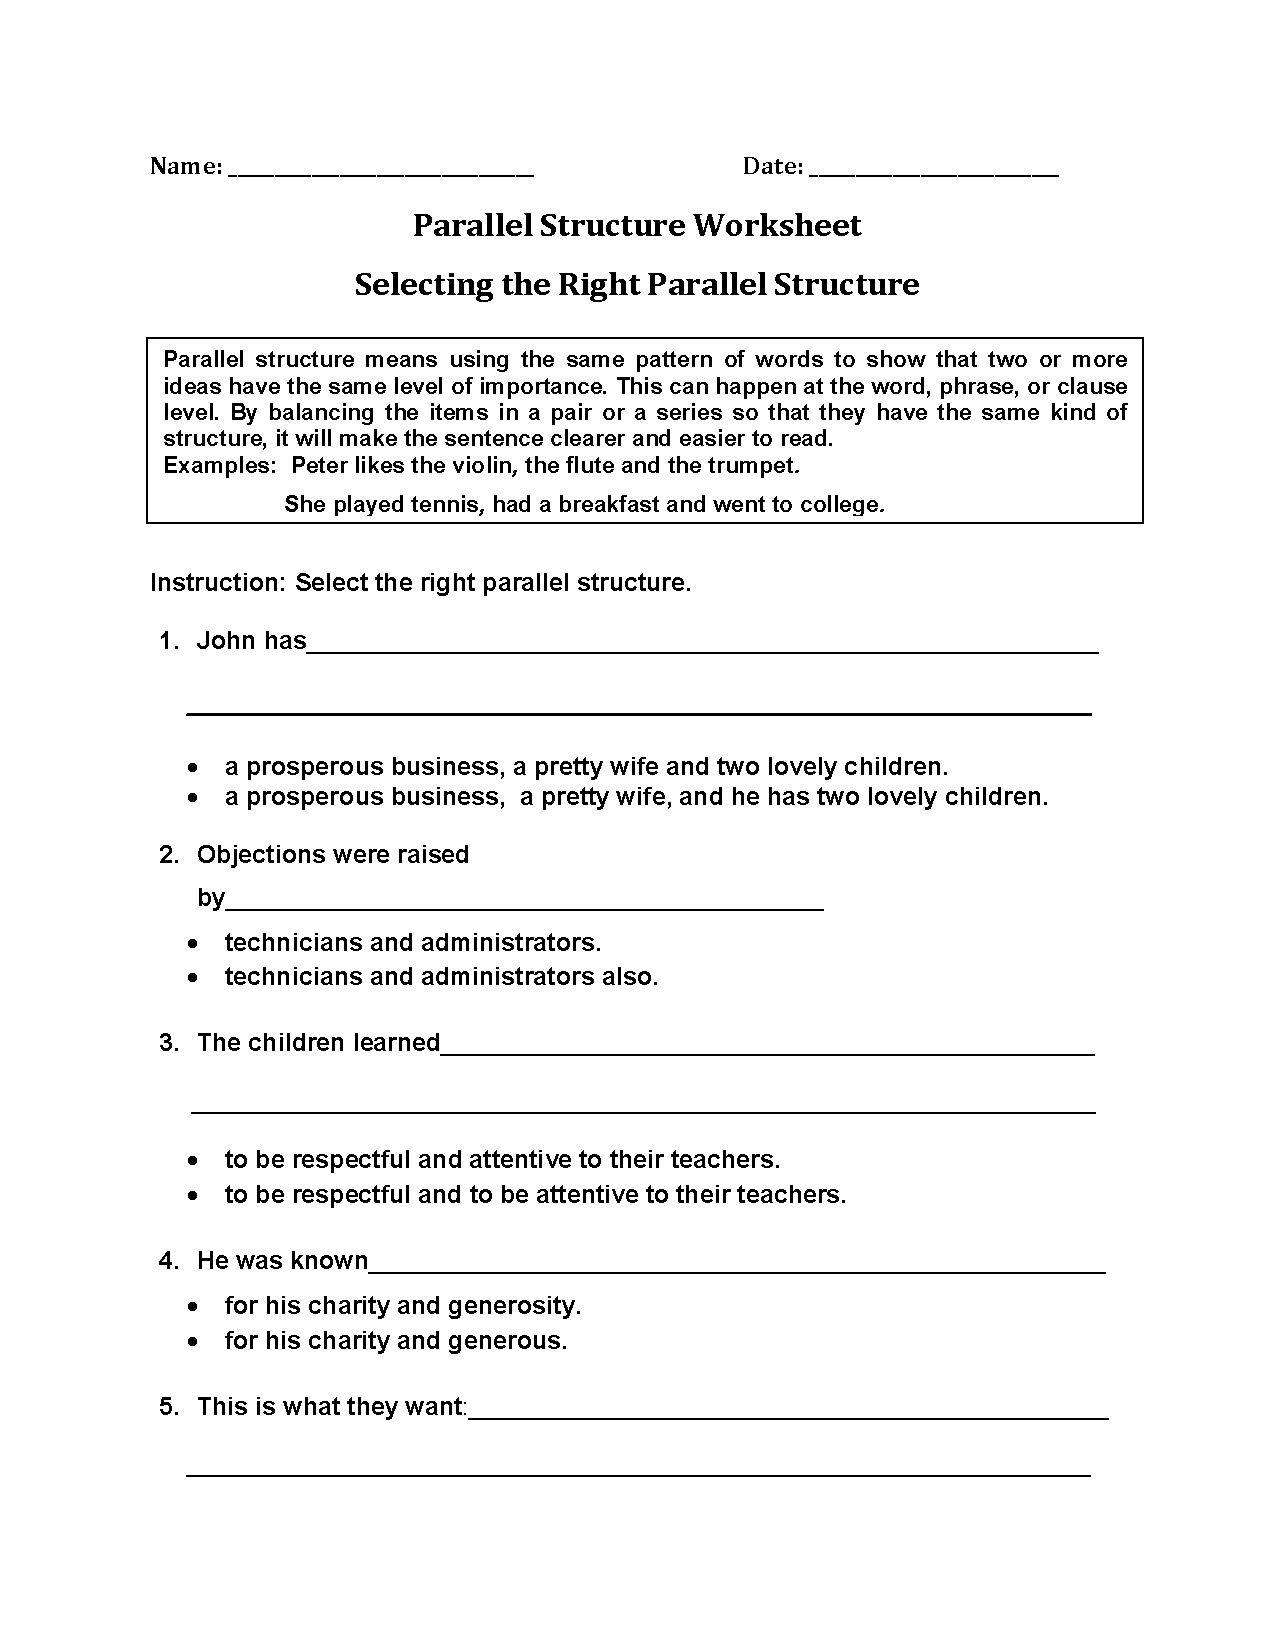 Parallel Structure Worksheet With Answers Ivuyteq